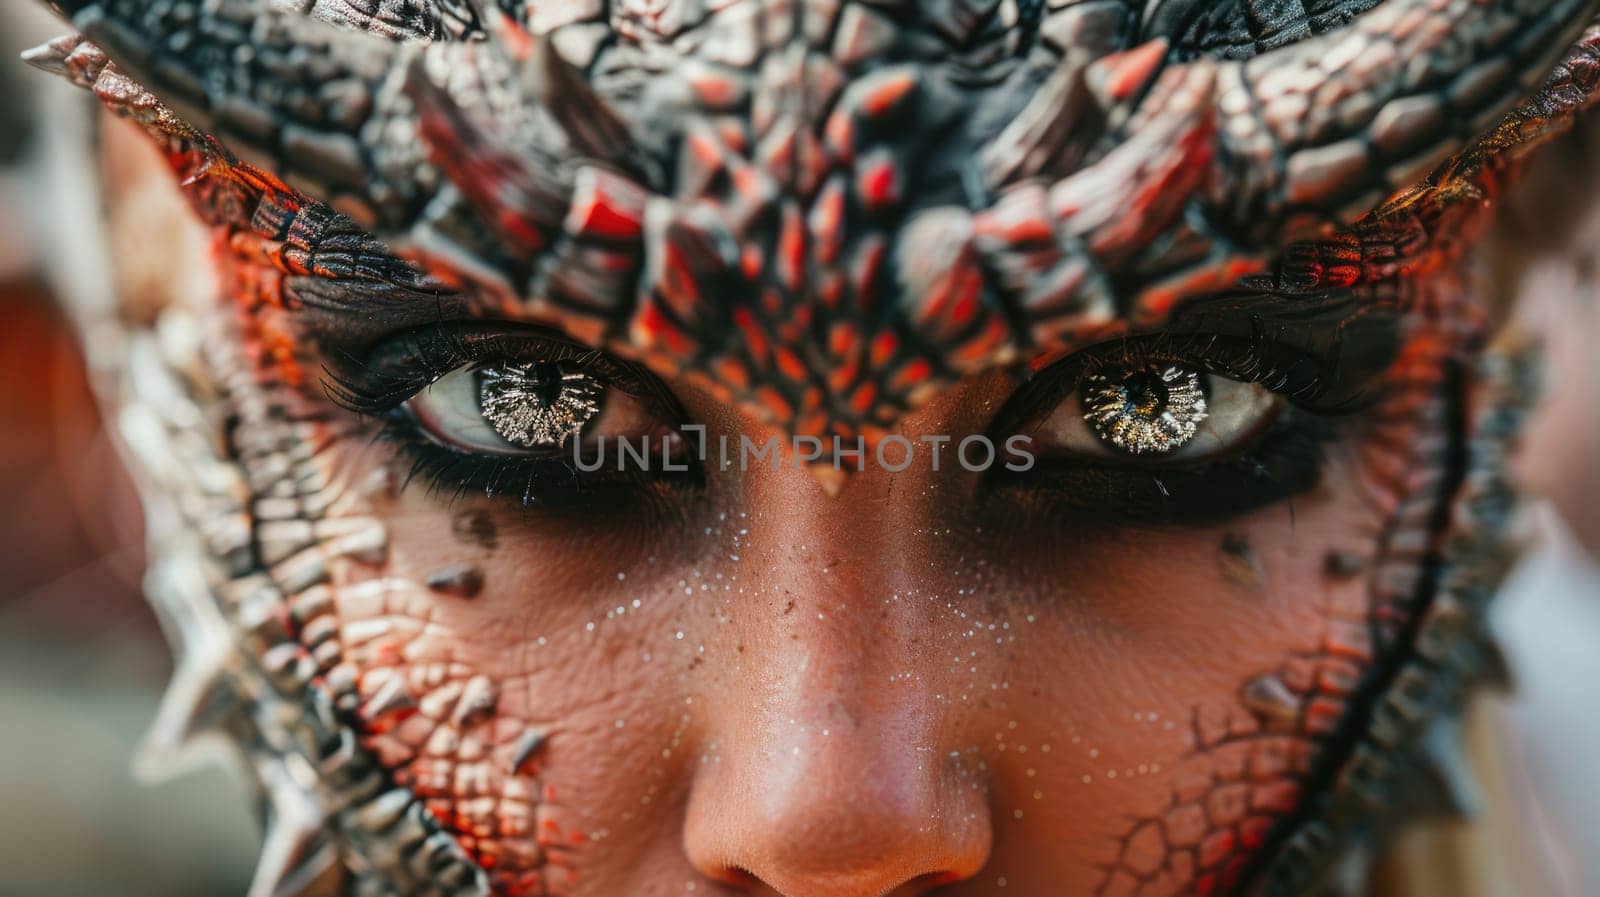 Fantasy portrait. Makeup of a mythical dragon. Professional makeup for filming AI